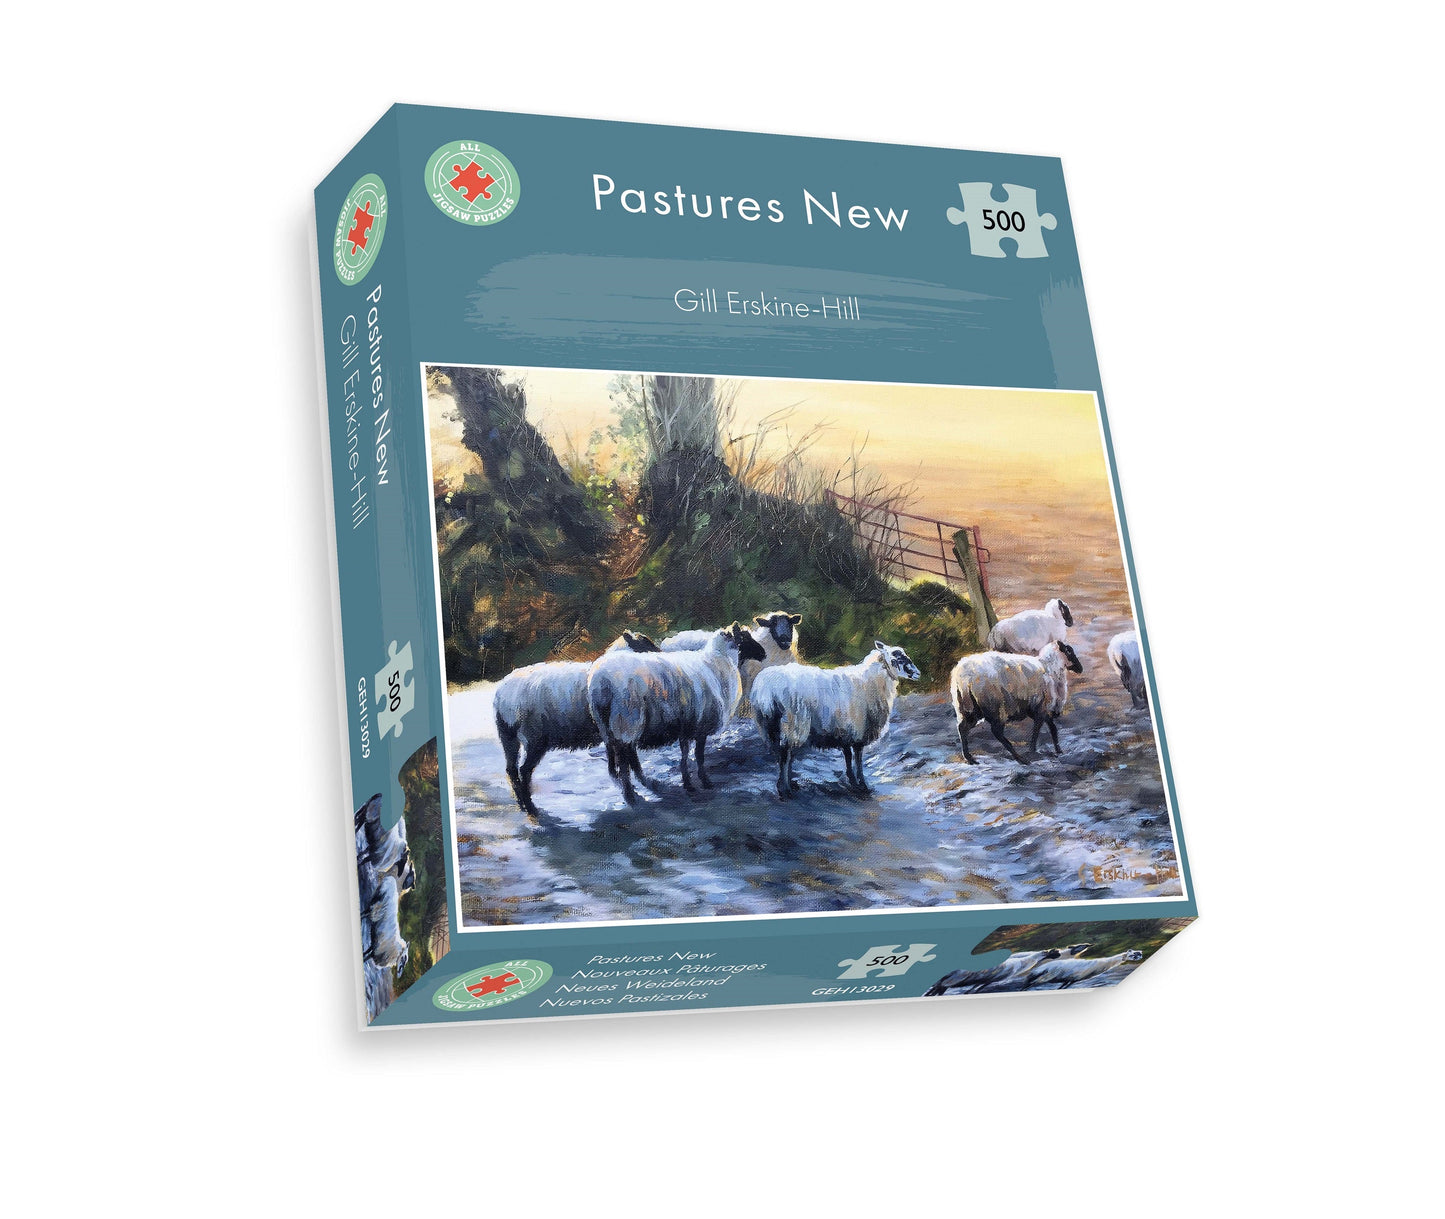 Pastures New 500 Piece Gill Erskine-Hill Jigsaw Puzzle